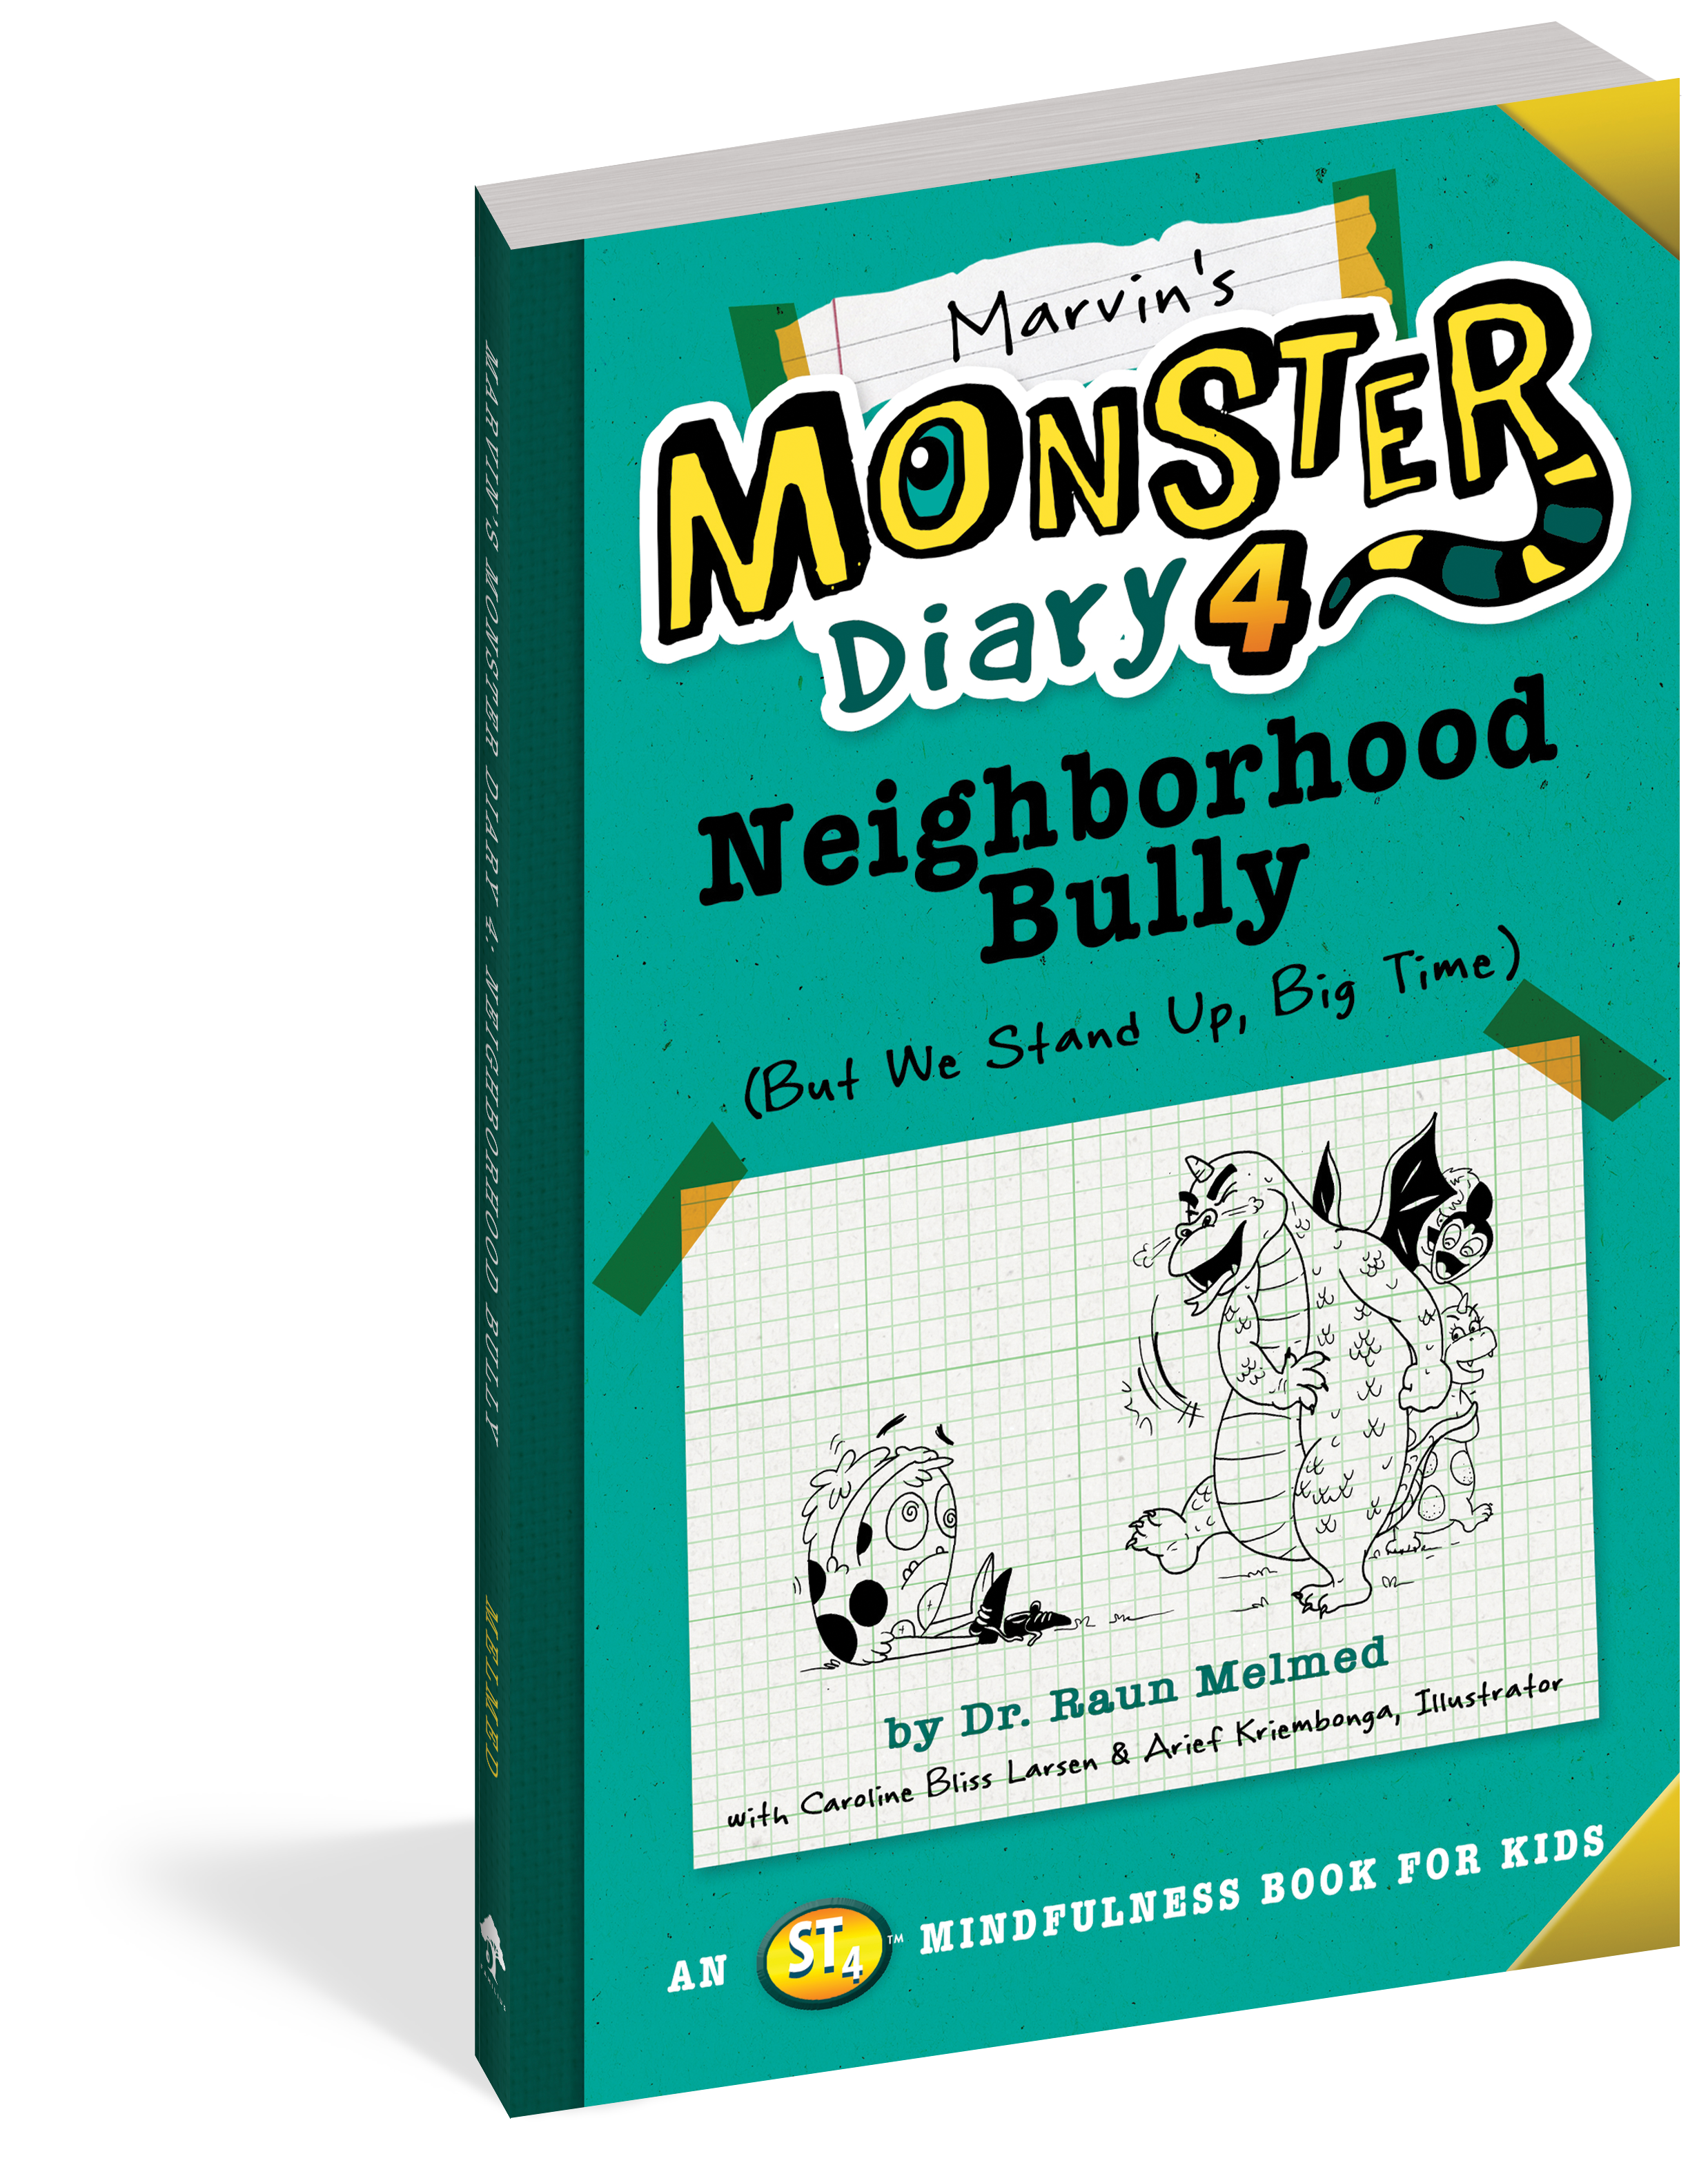 The cover of the book Marvin's Monster Diary 4: Neighborhood Bully.